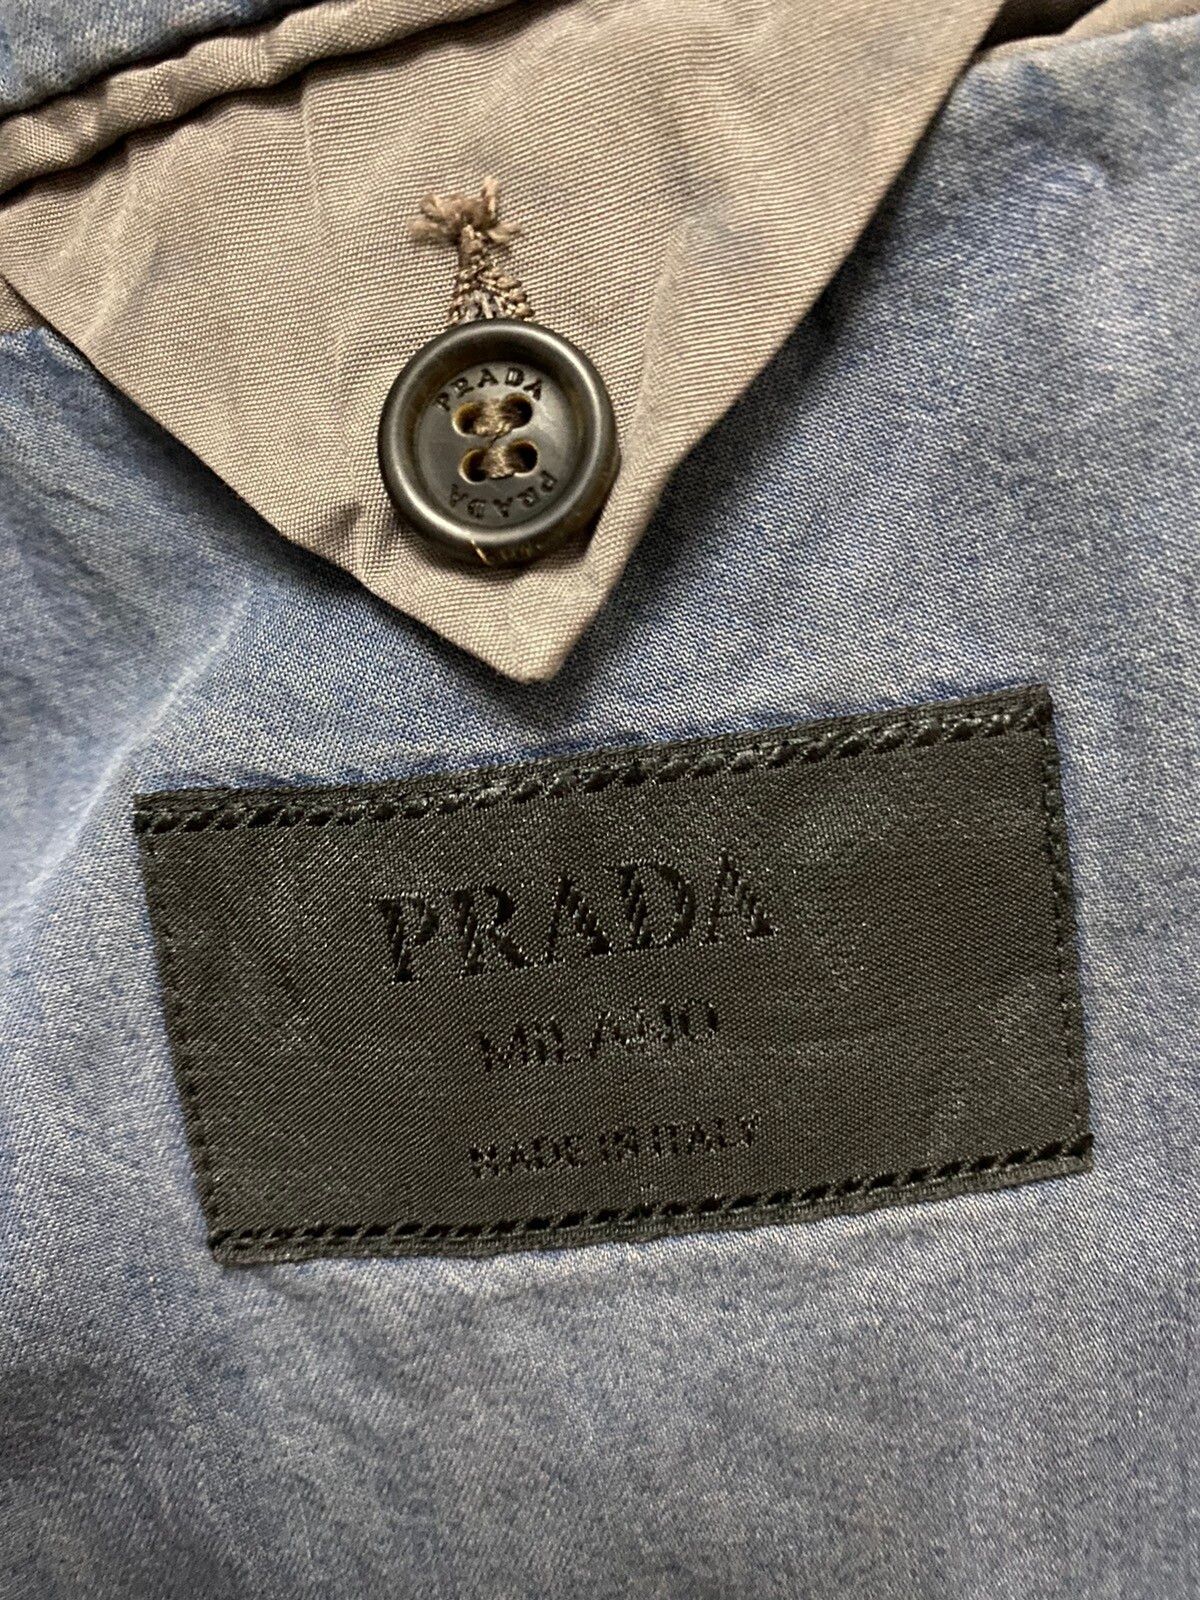 PRADA Button Up Multipocket Light Jacket Made in Italy - 7